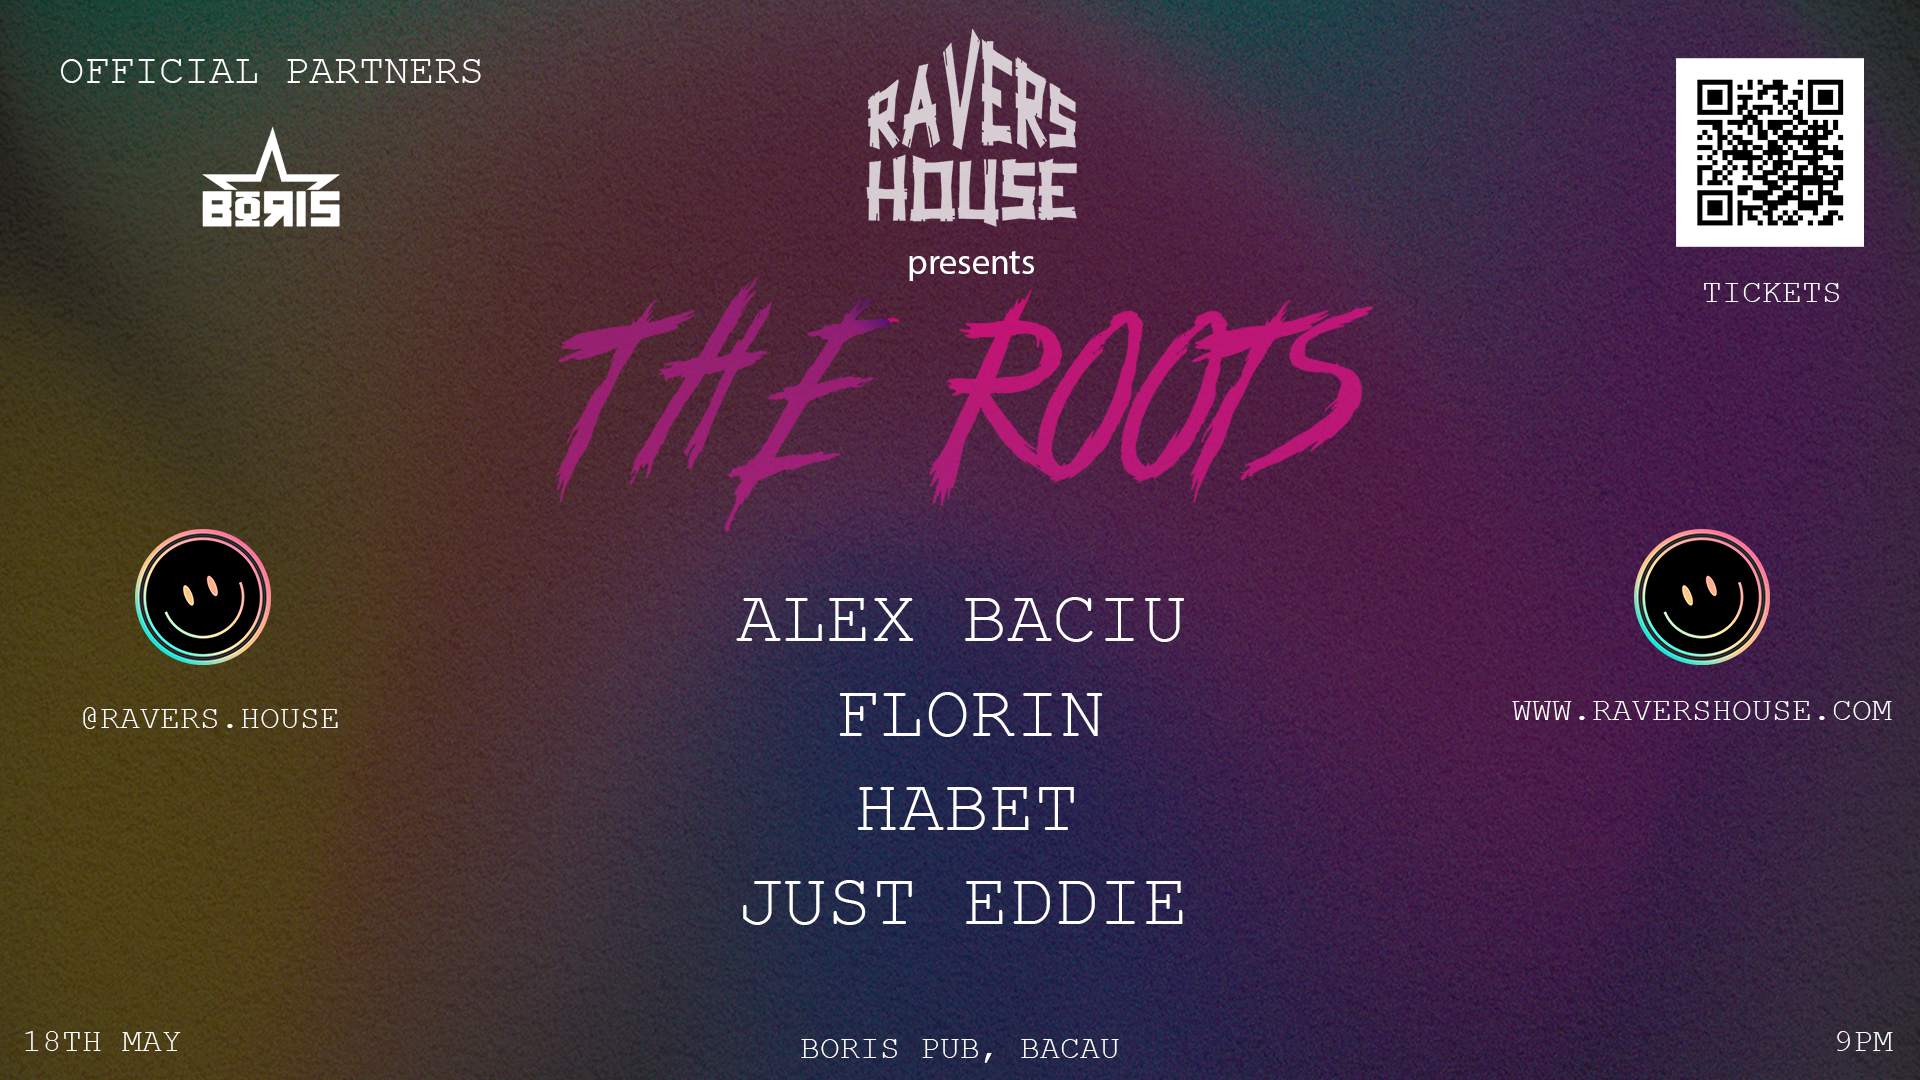 Ravers House presents 'The Roots' - Página frontal